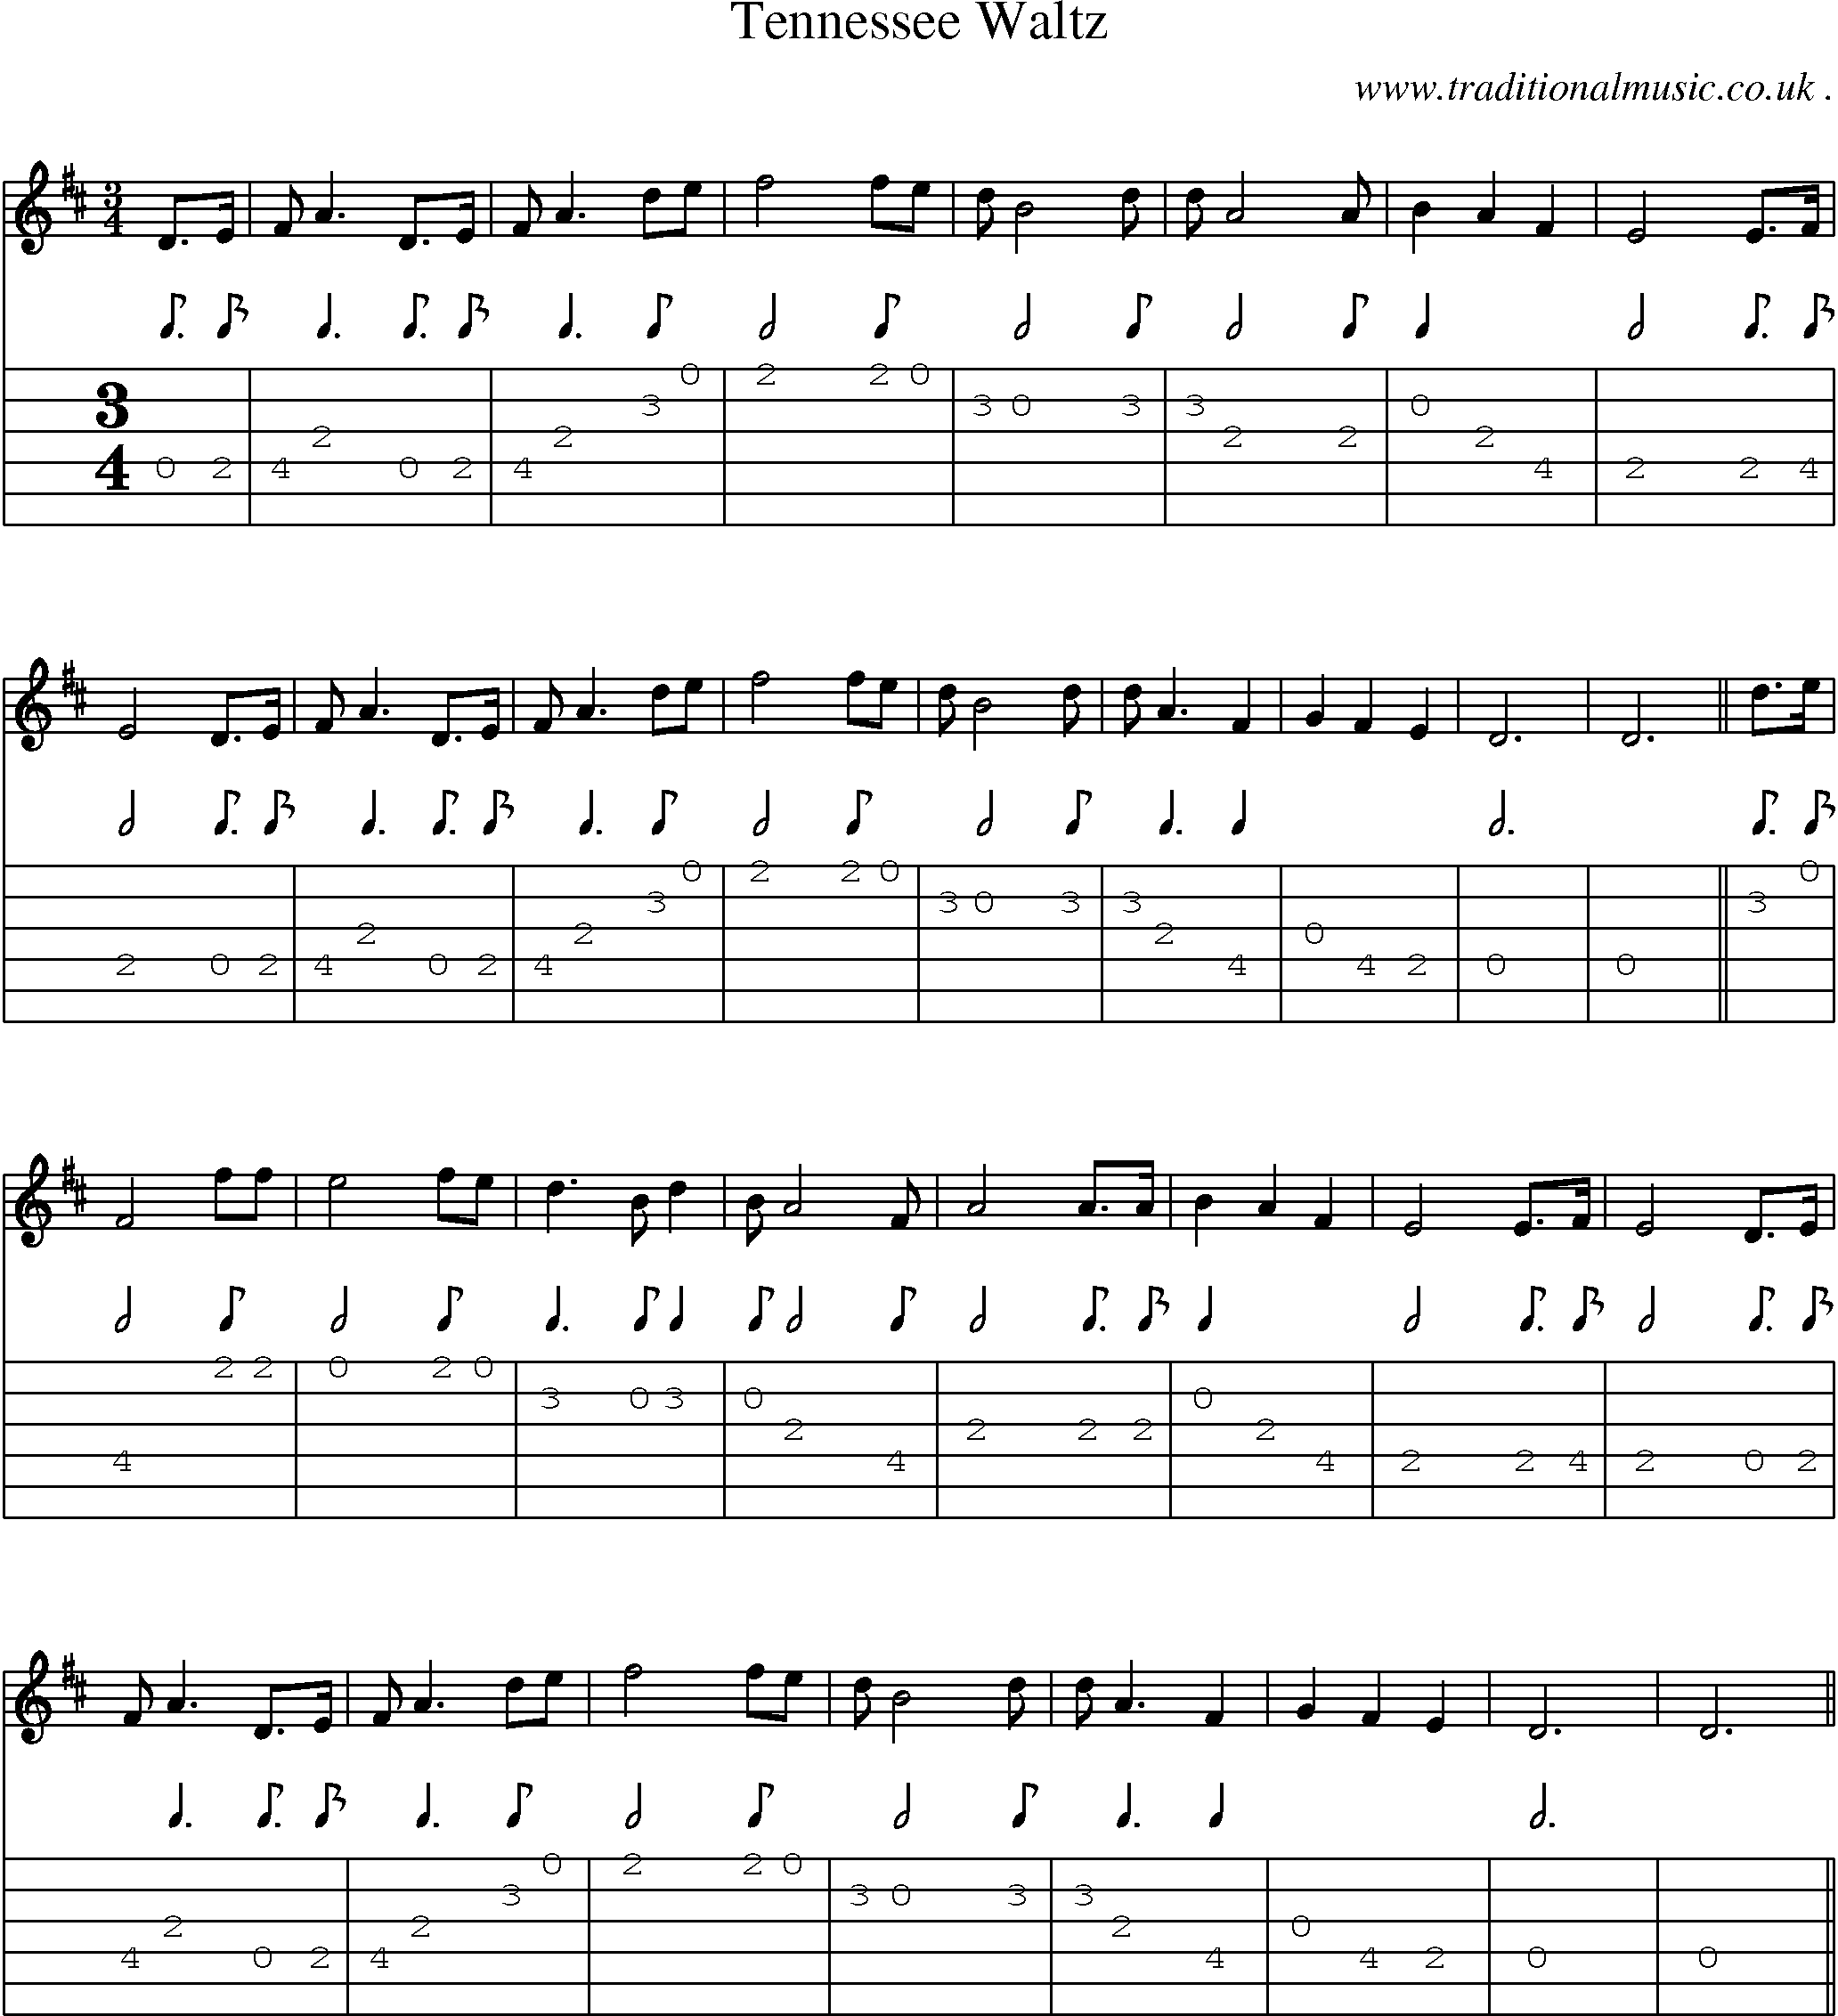 Music Score and Guitar Tabs for Tennessee Waltz